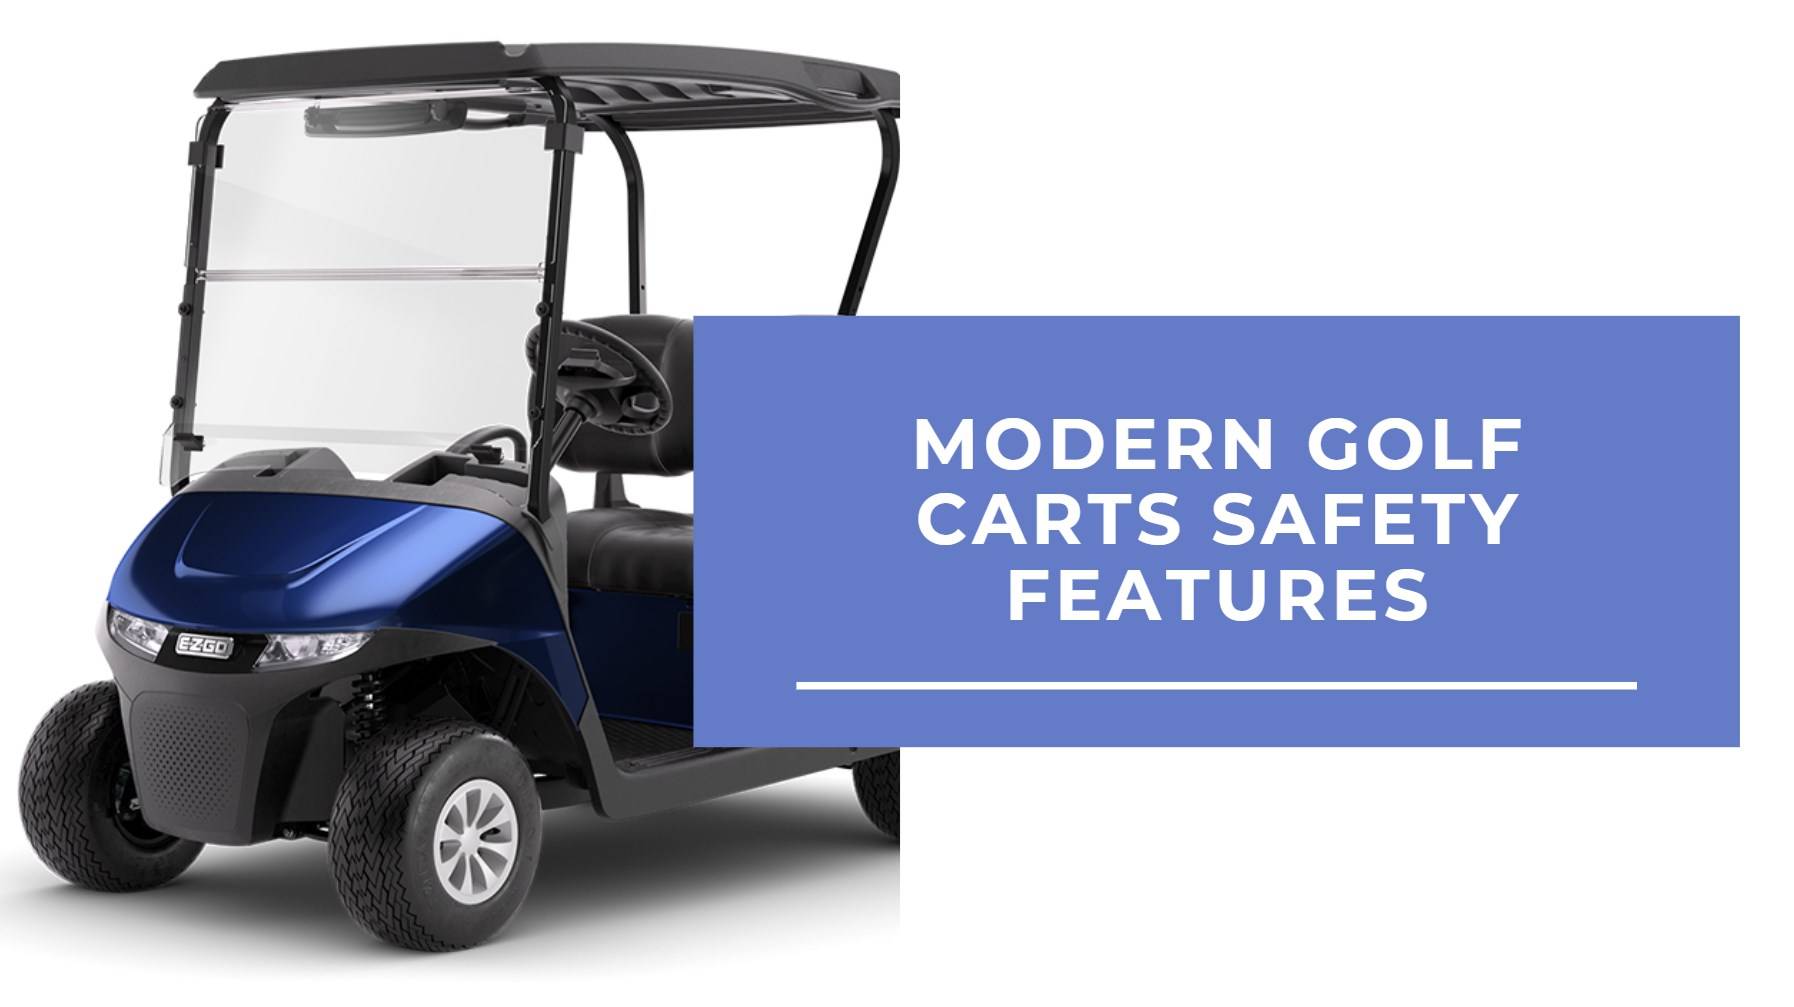 What safety features do modern golf carts have? Safety Features of Golf Carts